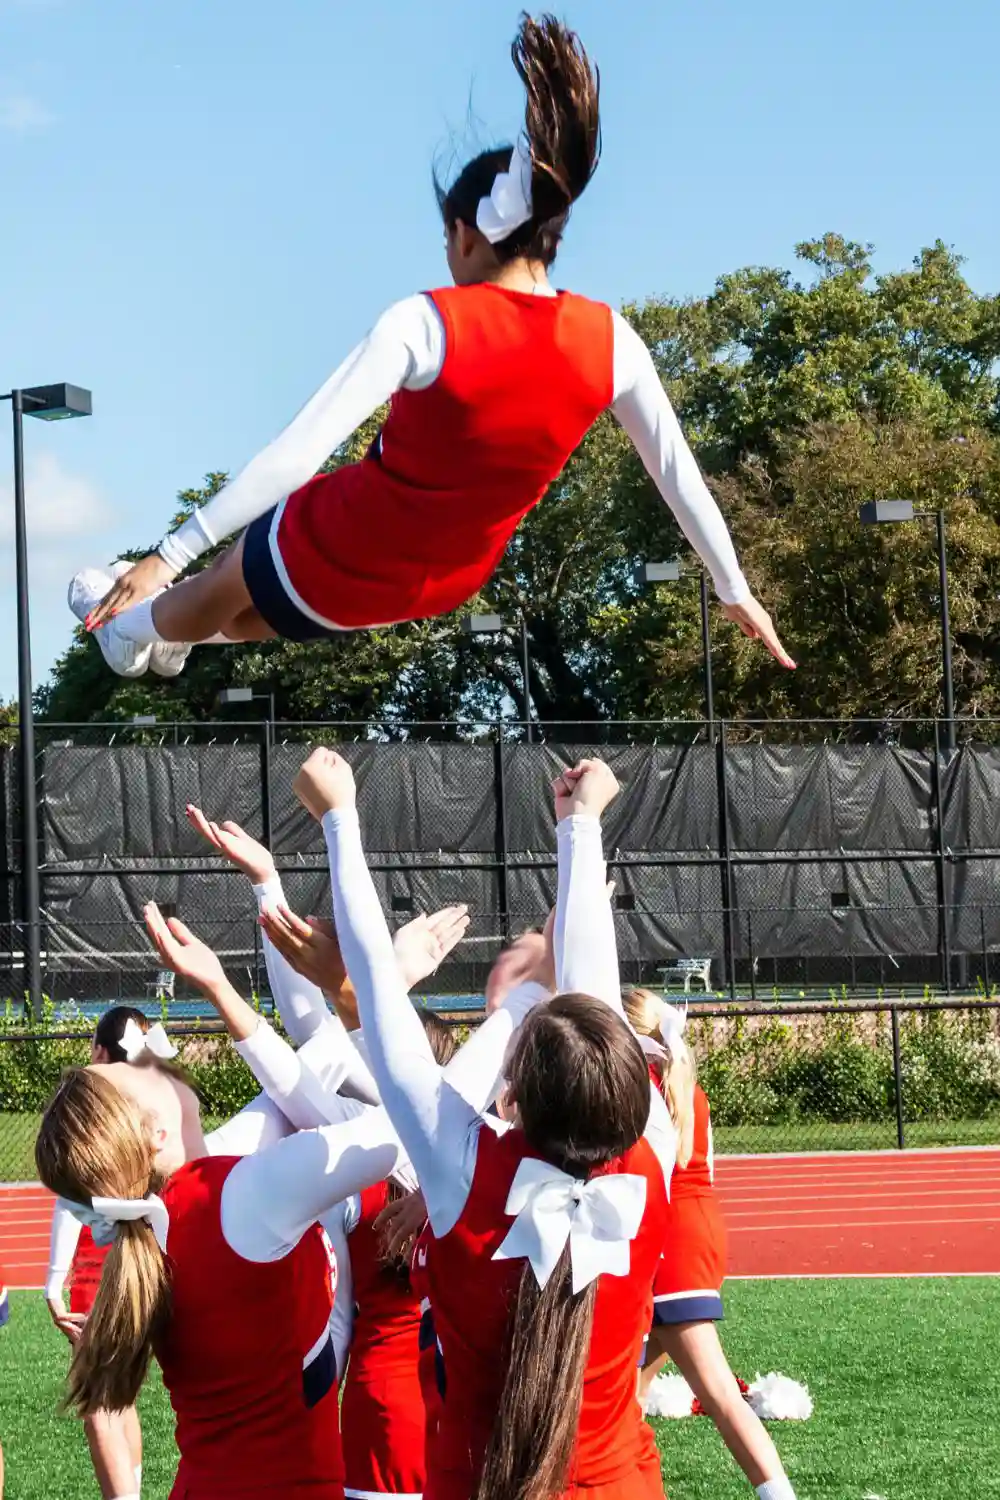 Cheerleading squad catching their teammate during practice